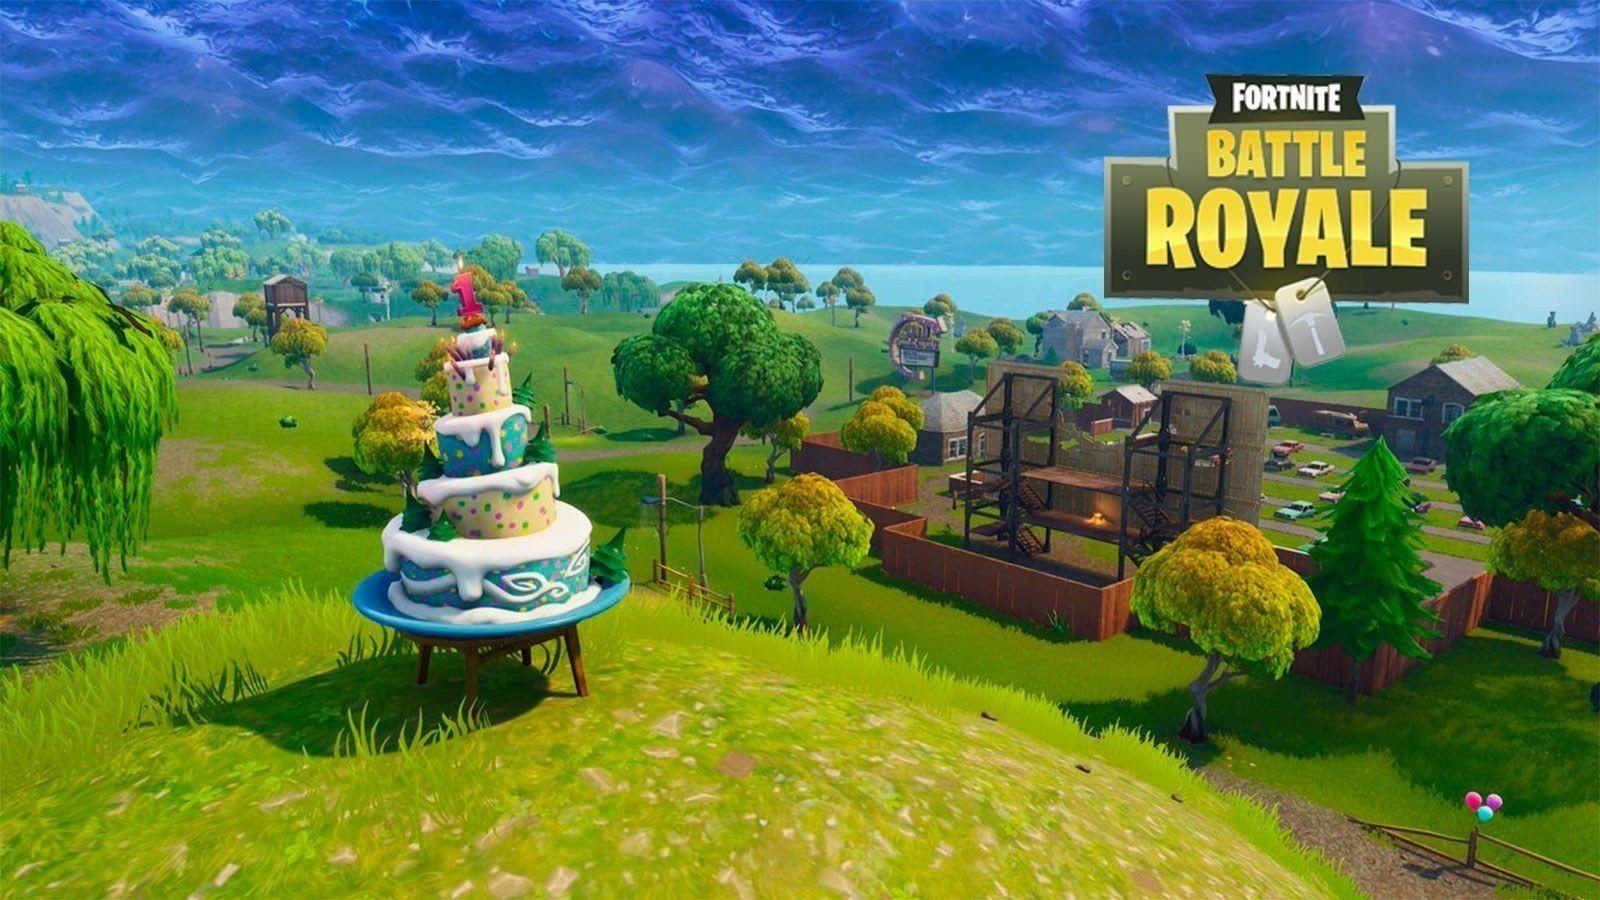 All Known Birthday Cake Locations for the Fortnite Battle Royale